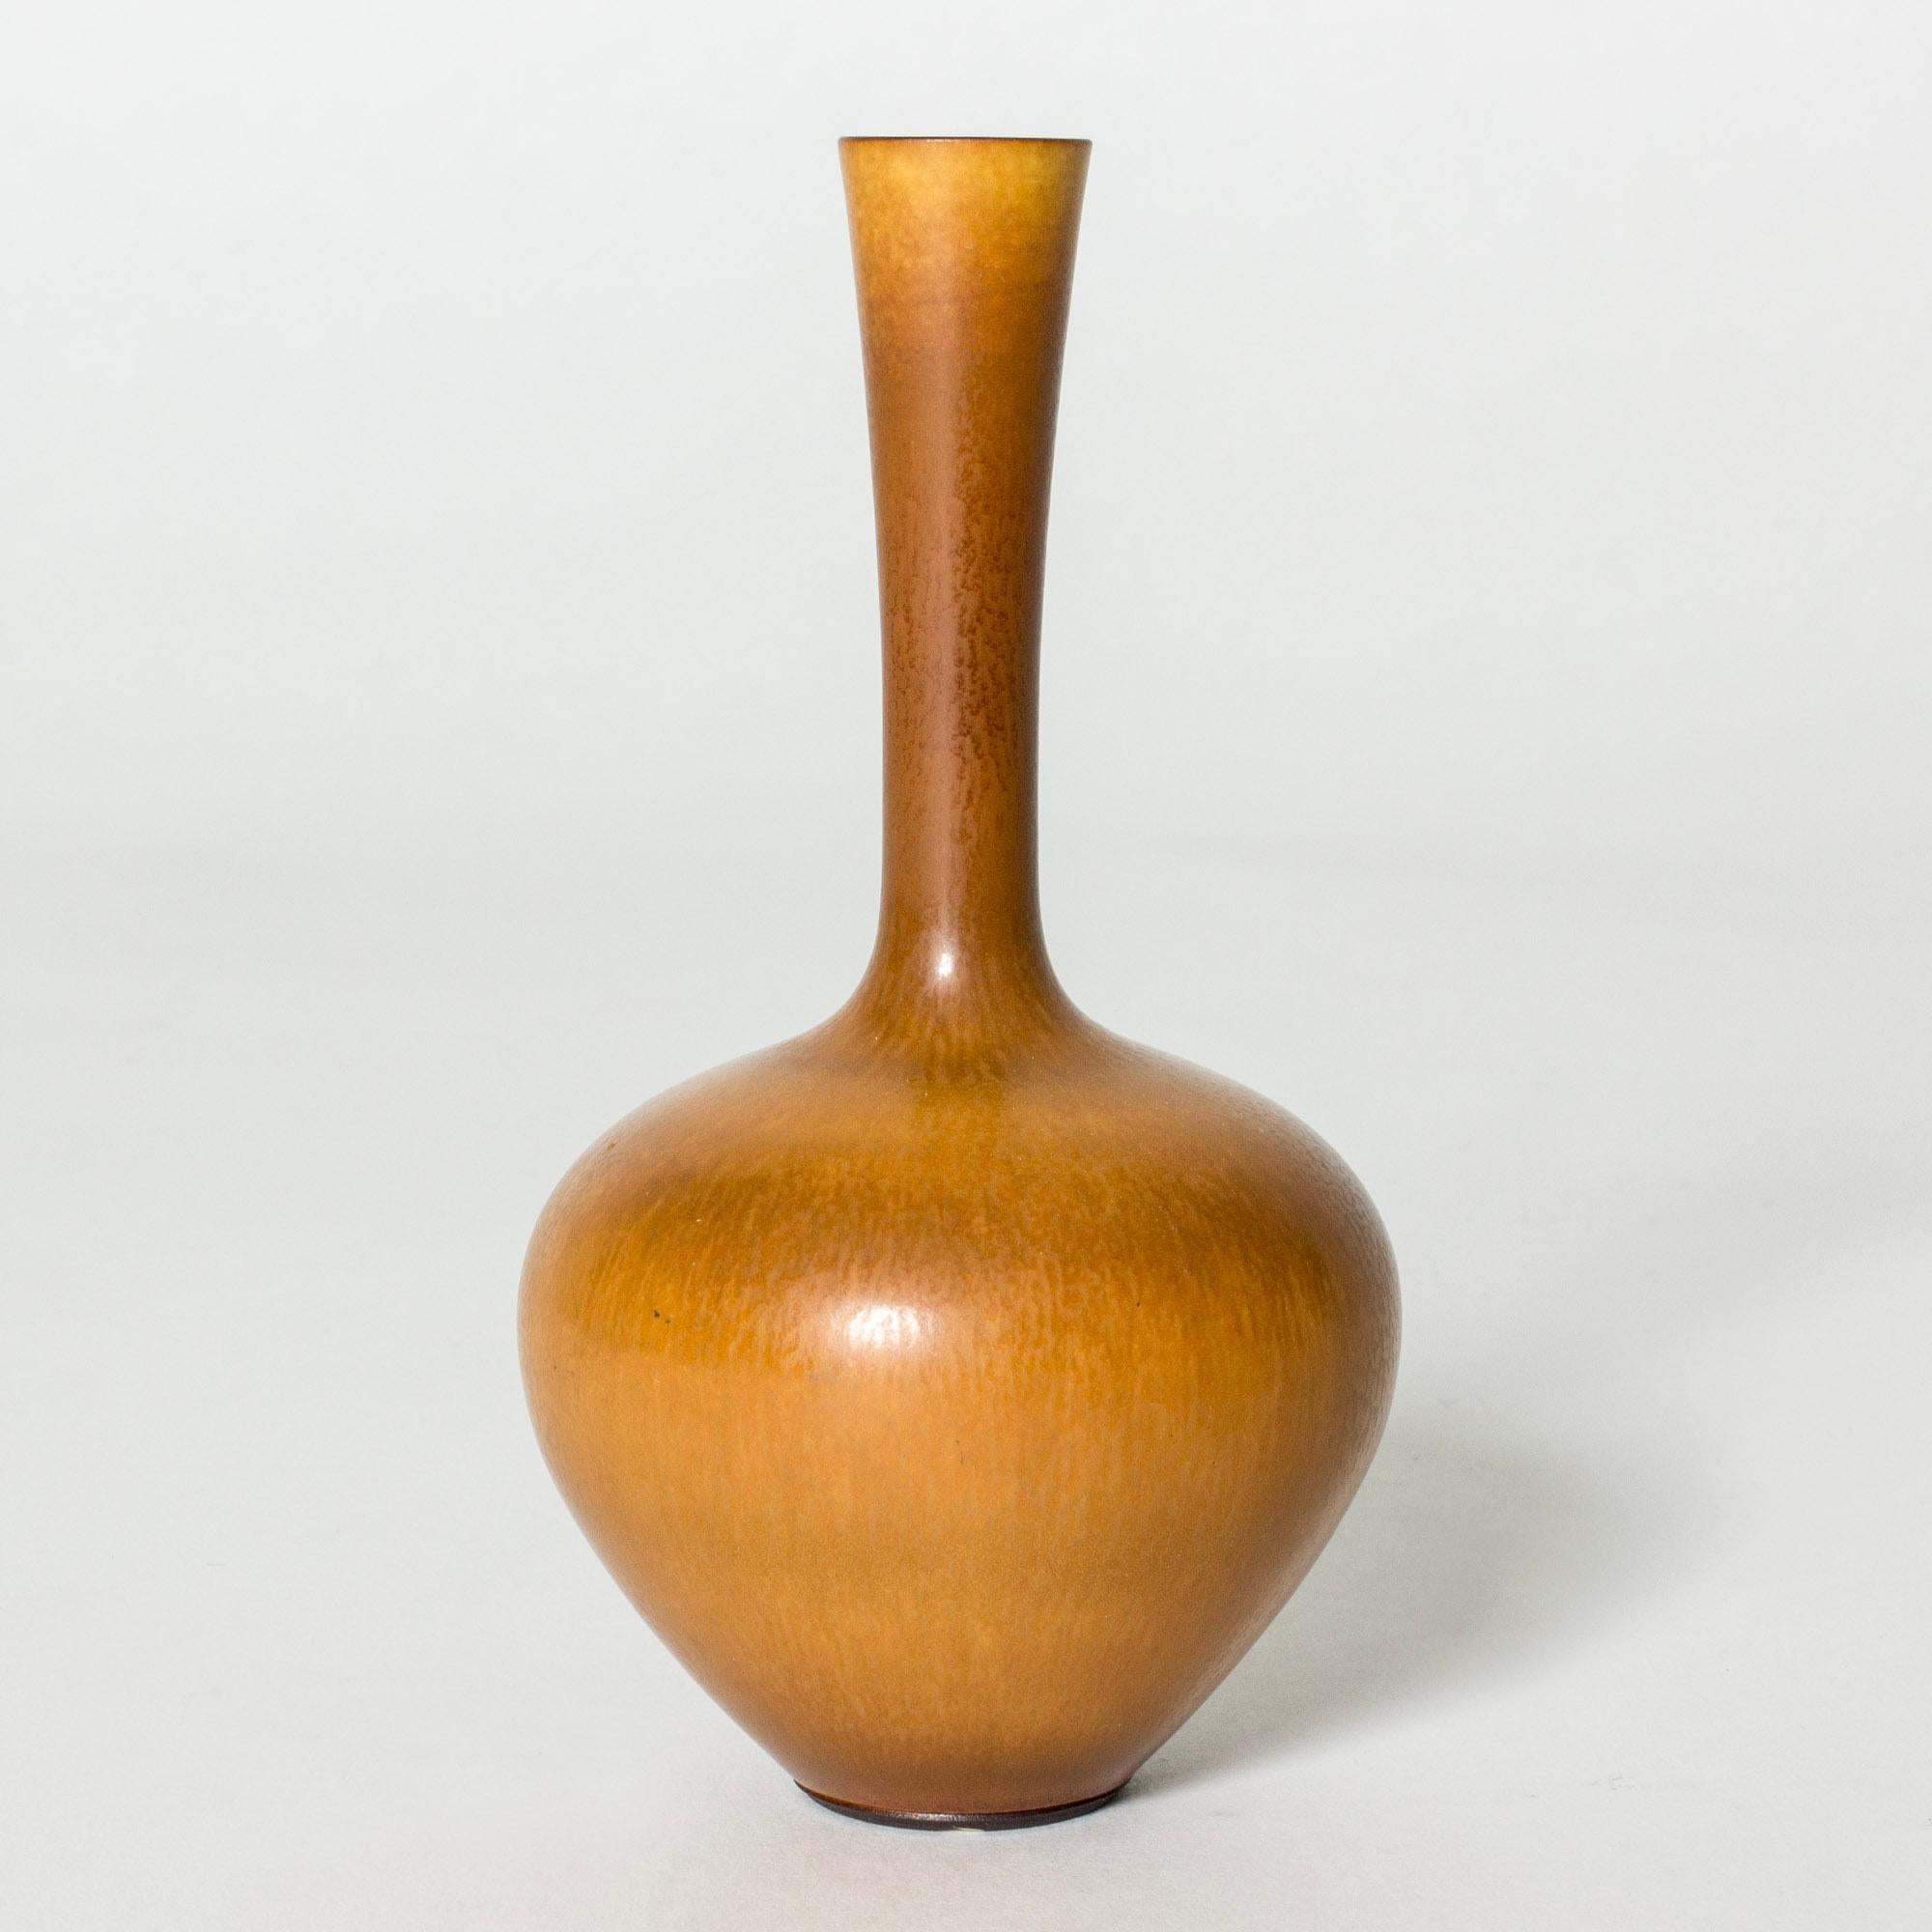 Small stoneware vase by Berndt Friberg, in a lovely onion form with a long neck. Warm brown hare’s fur glaze.

Berndt Friberg was a Swedish ceramicist, renowned for his stoneware vases and vessels for Gustavsberg. His pure, composed designs with